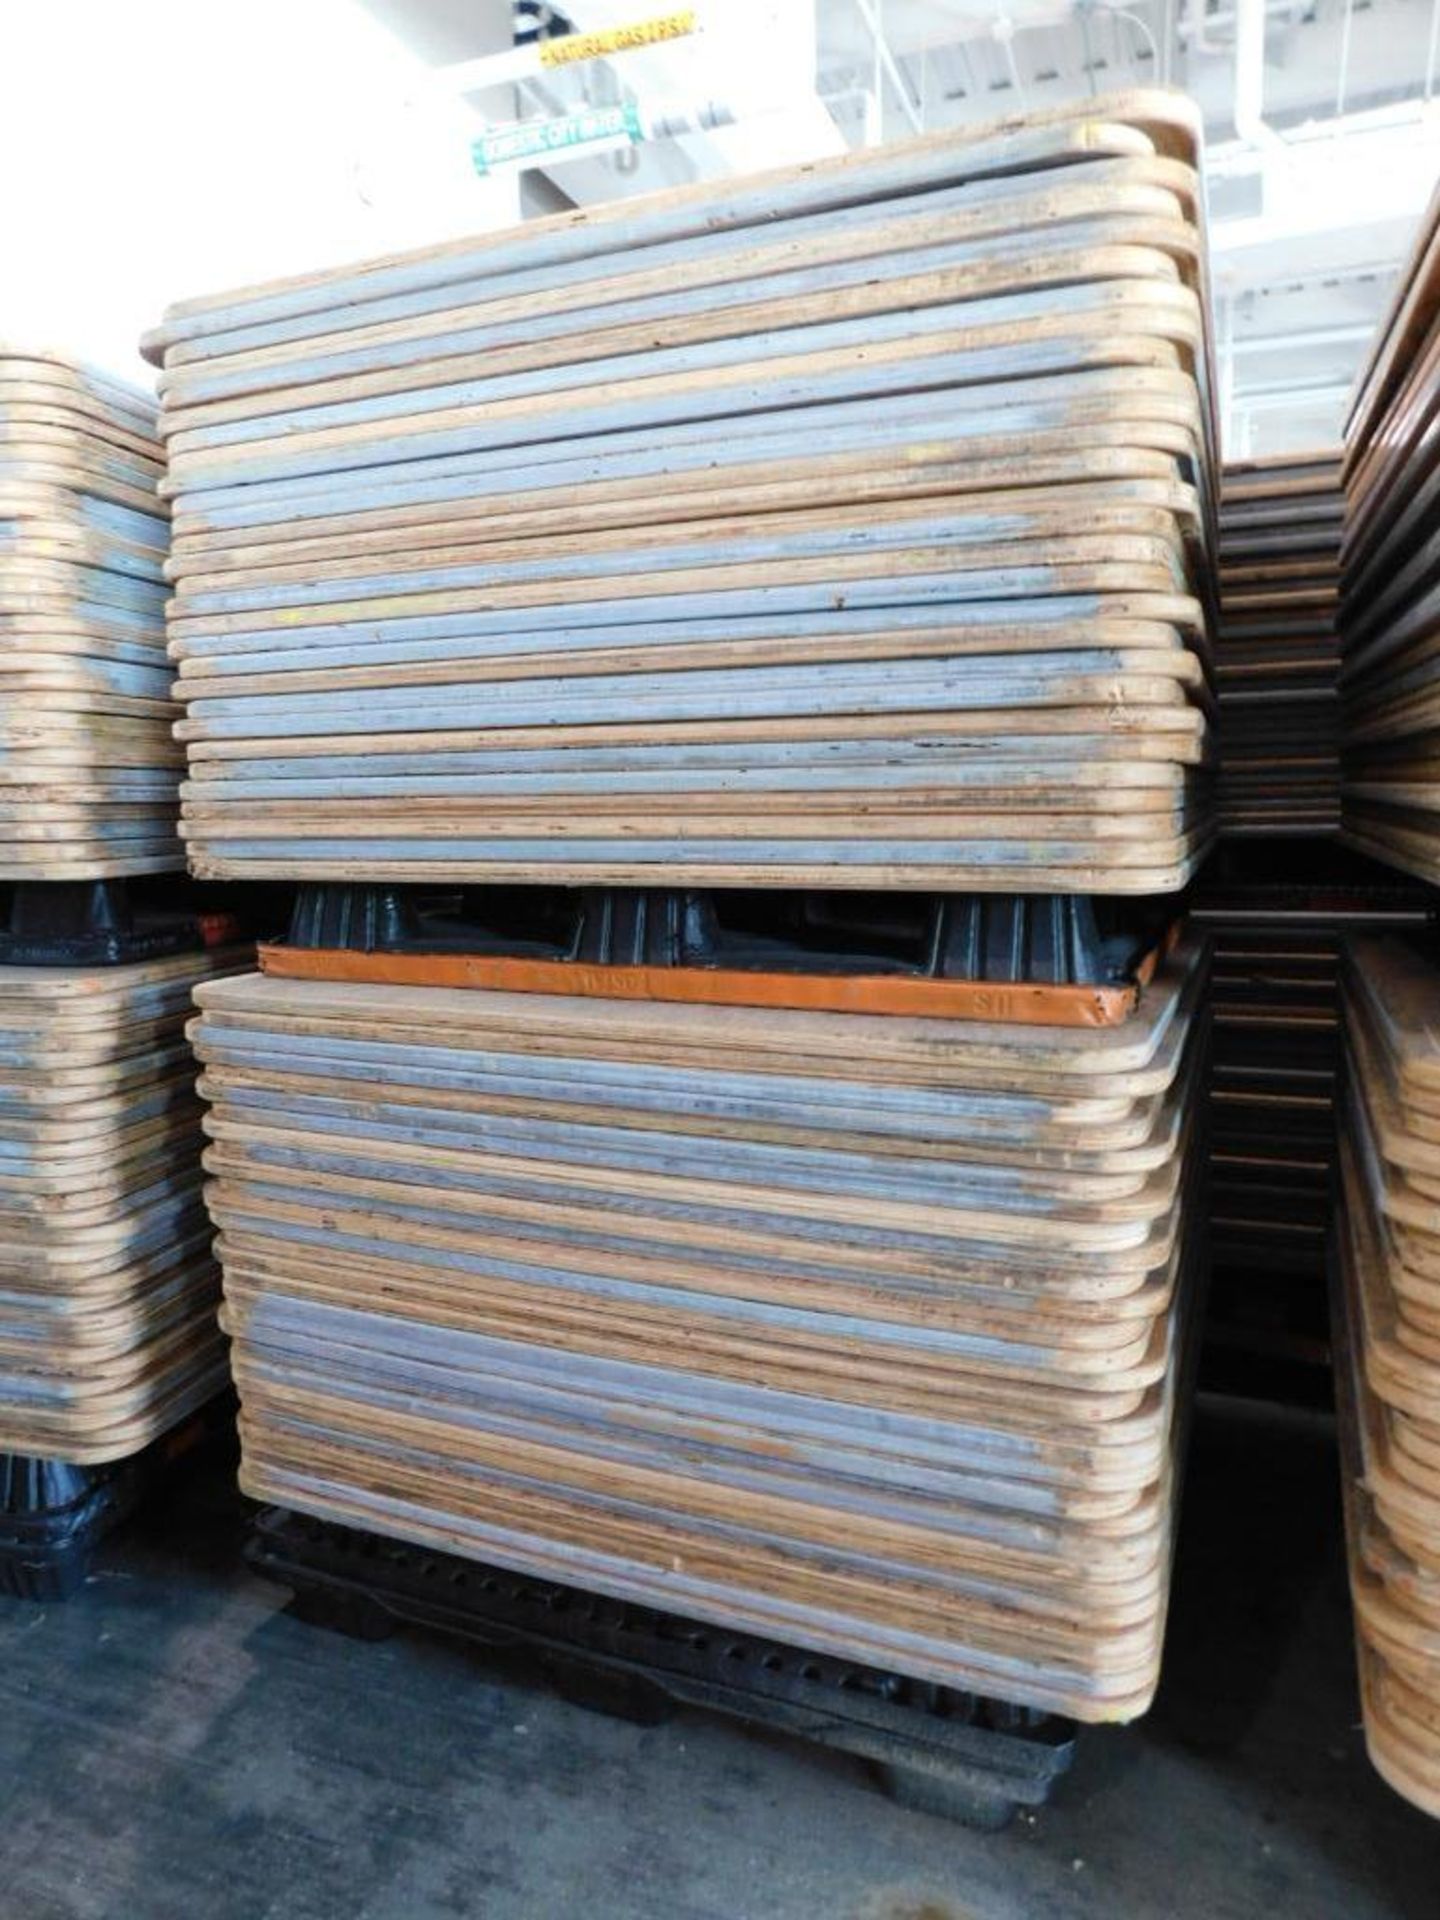 LOT: Large Quantity of 50" x 50" Wood Paper Roll Pallets on (12) Plastic Pallets (LOCATION: IN MAIL - Image 7 of 8